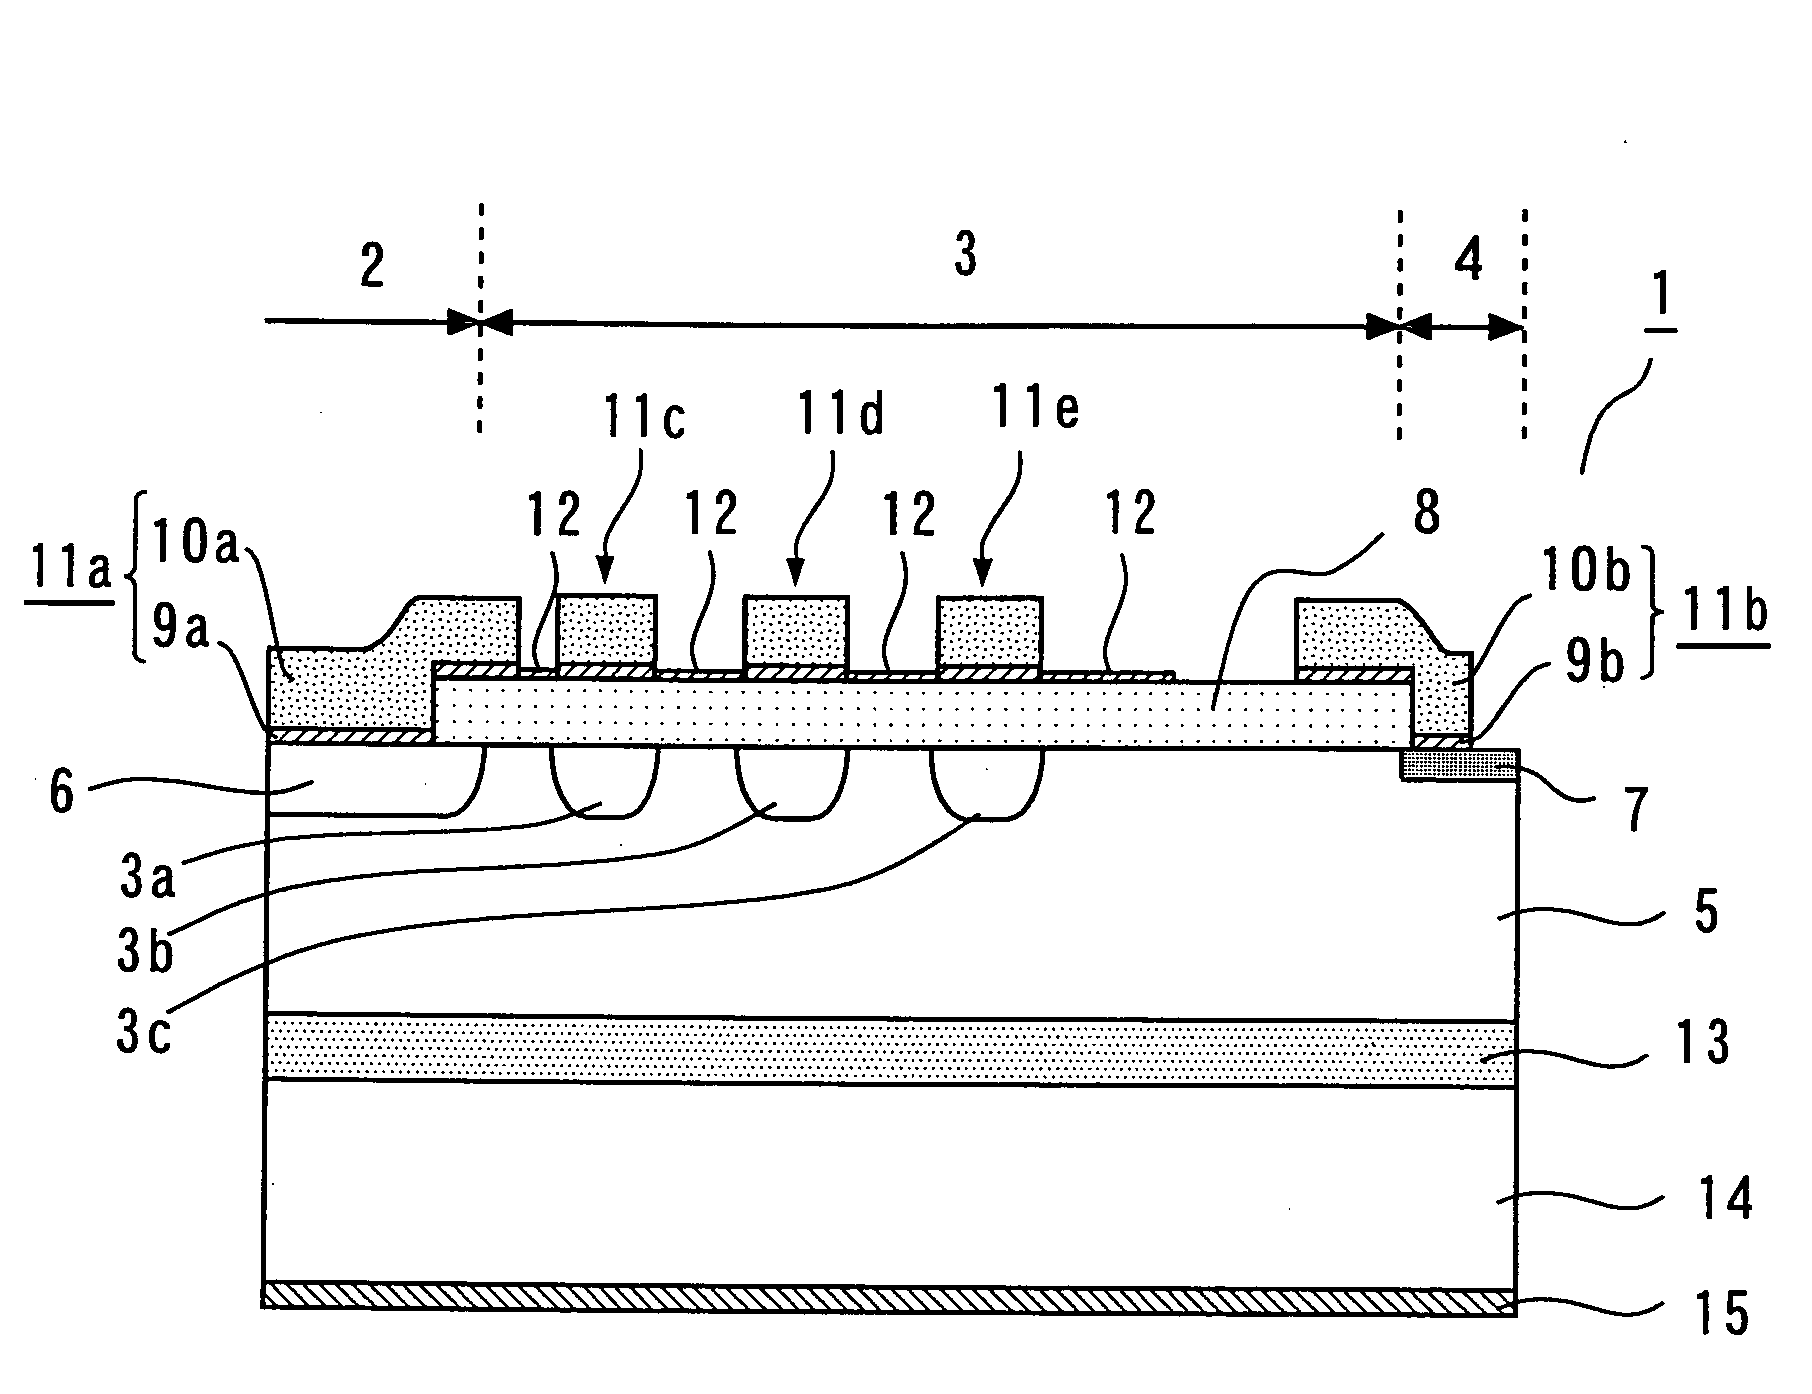 Semiconductor device having an improved structure for high withstand voltage